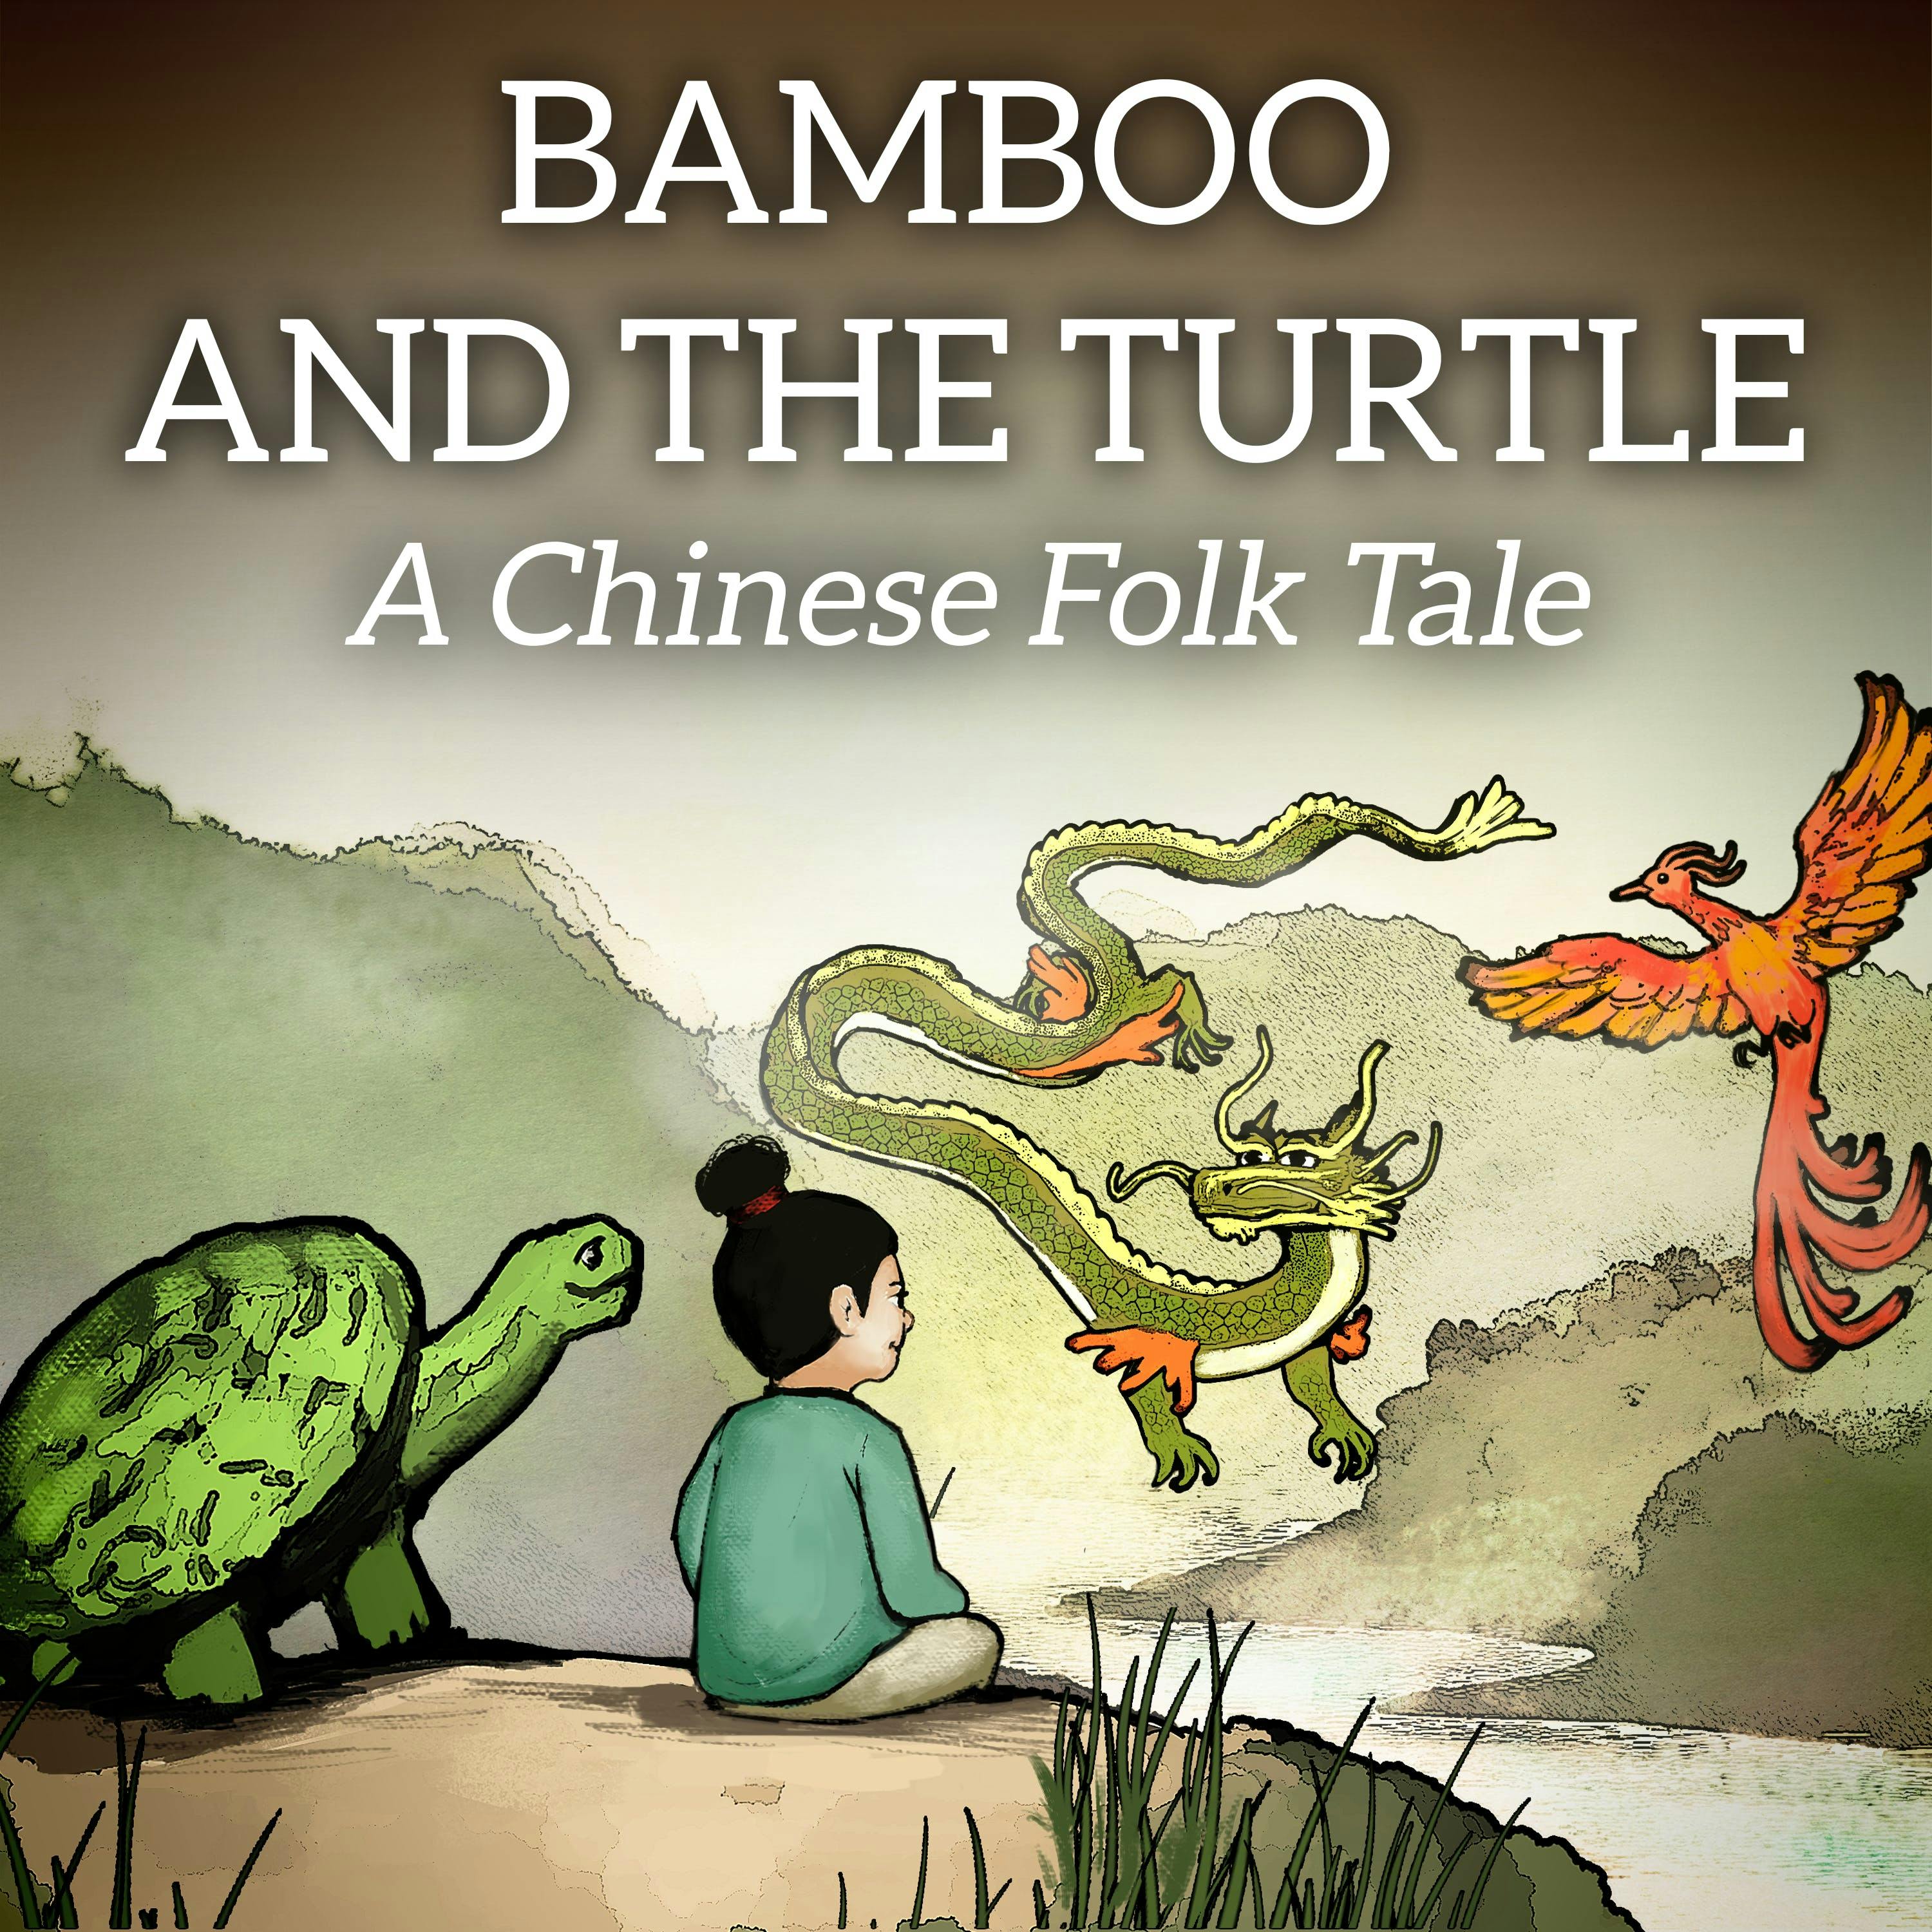 Bamboo and the Turtle: A Chinese Folk Tale